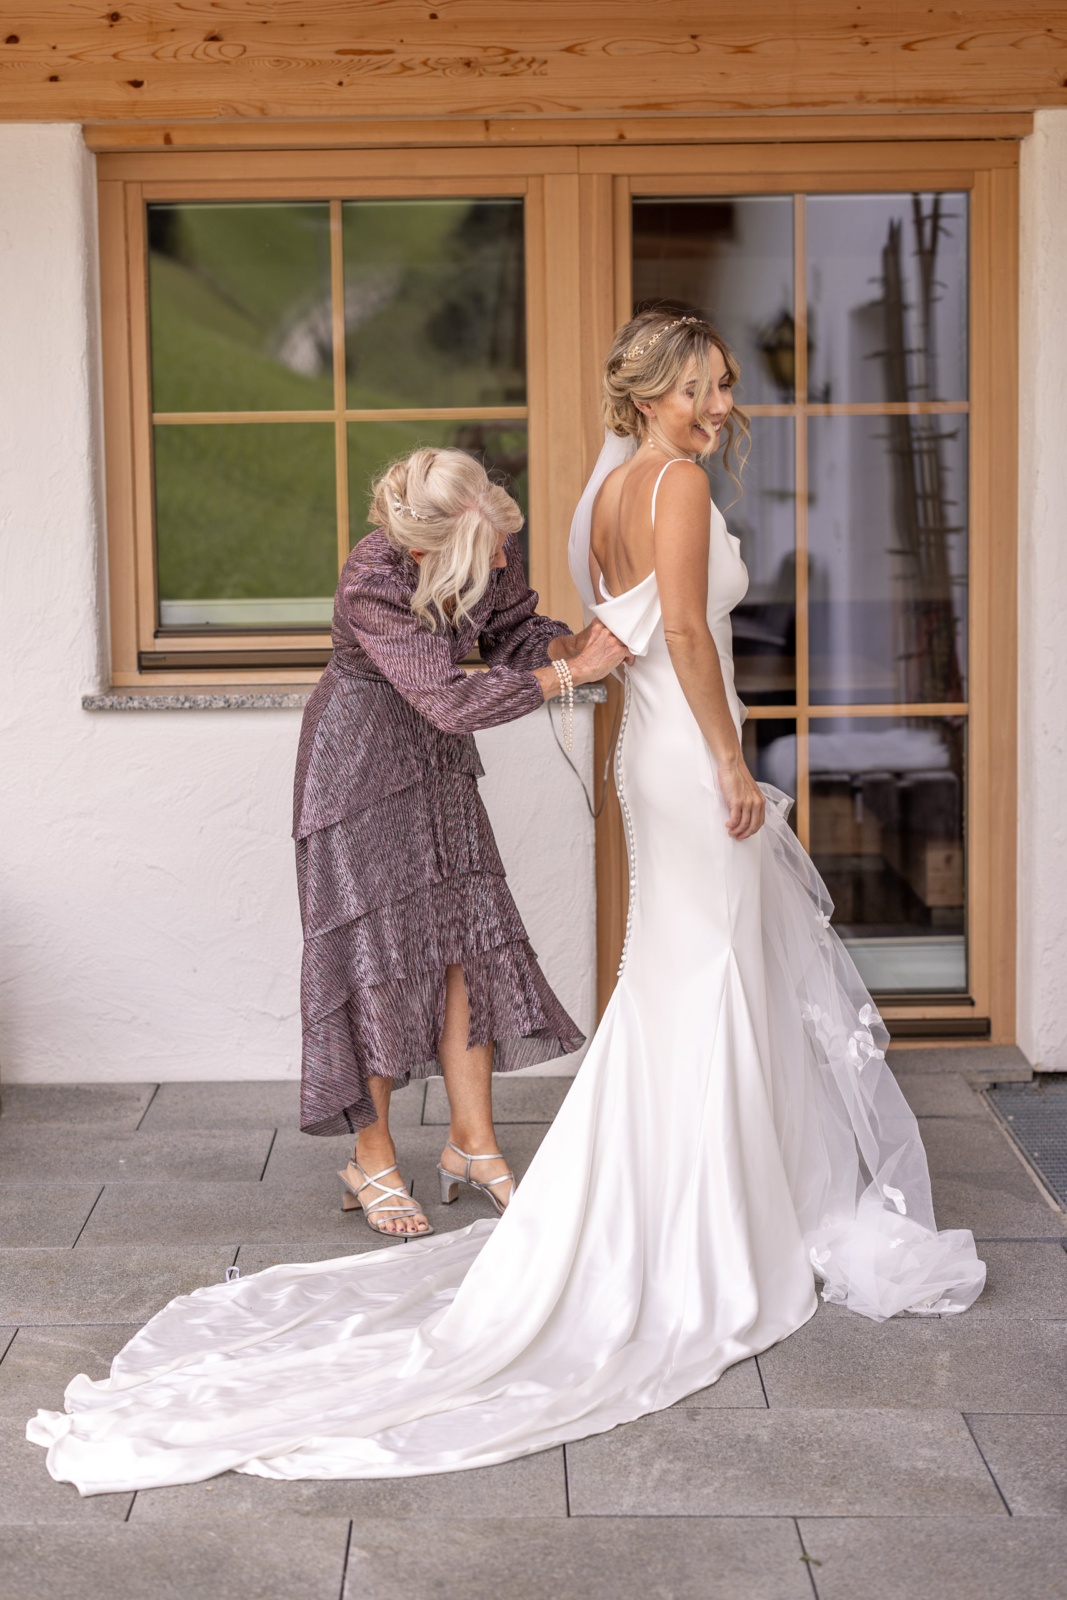 mother helps bride to put on her wedding dress